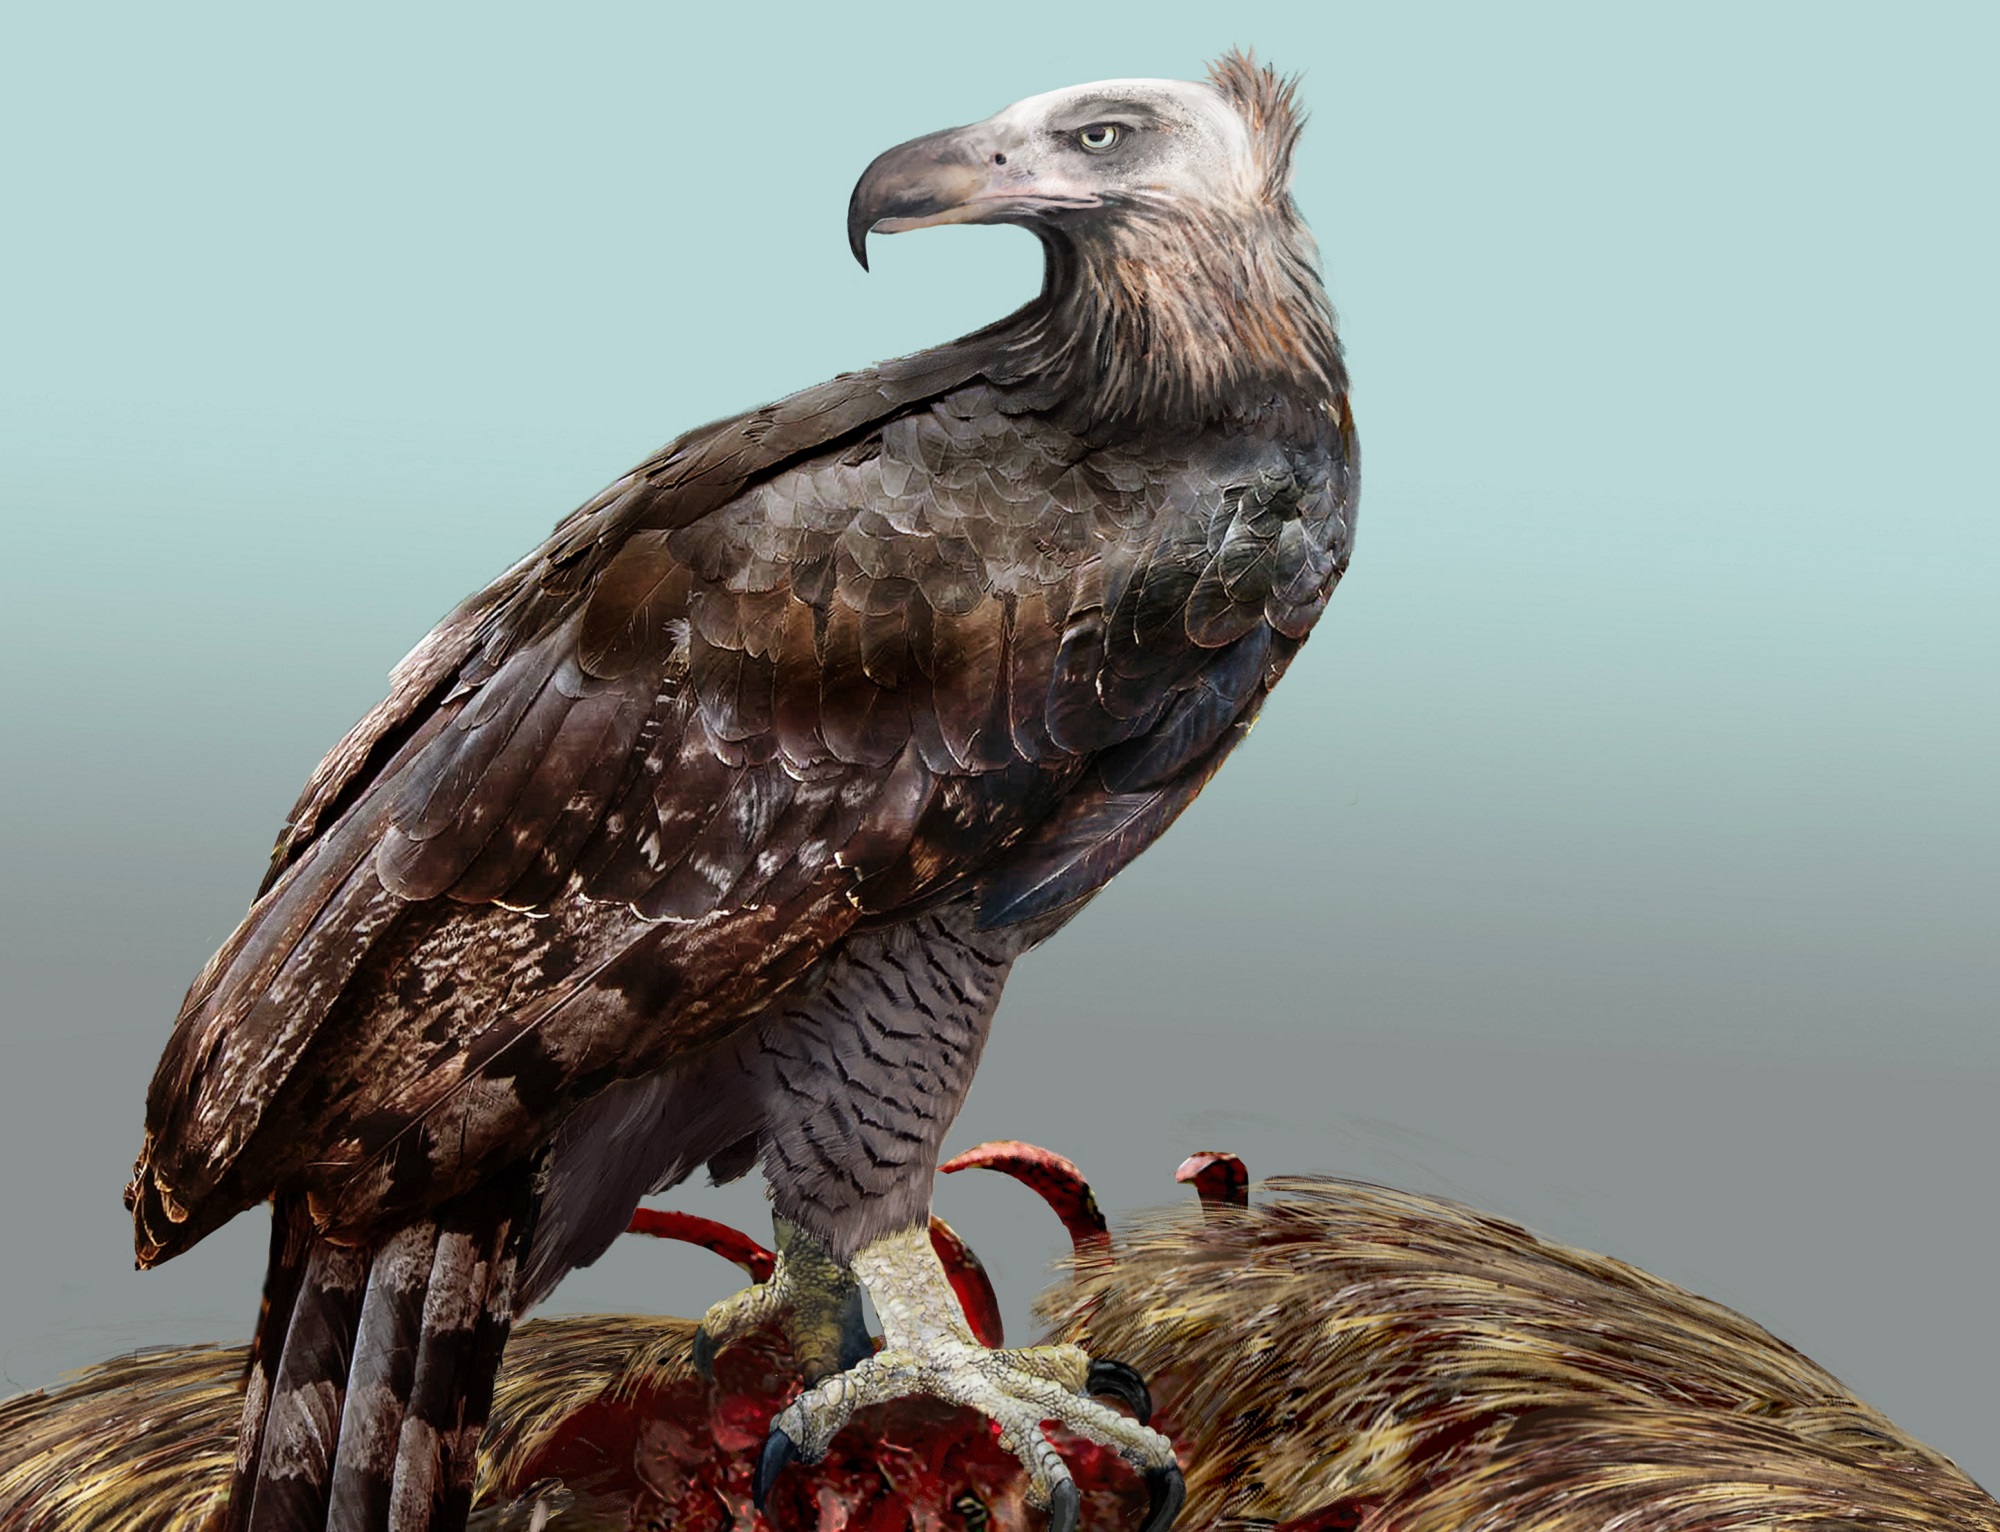 Biggest known eagle acted like a vulture | Popular Science